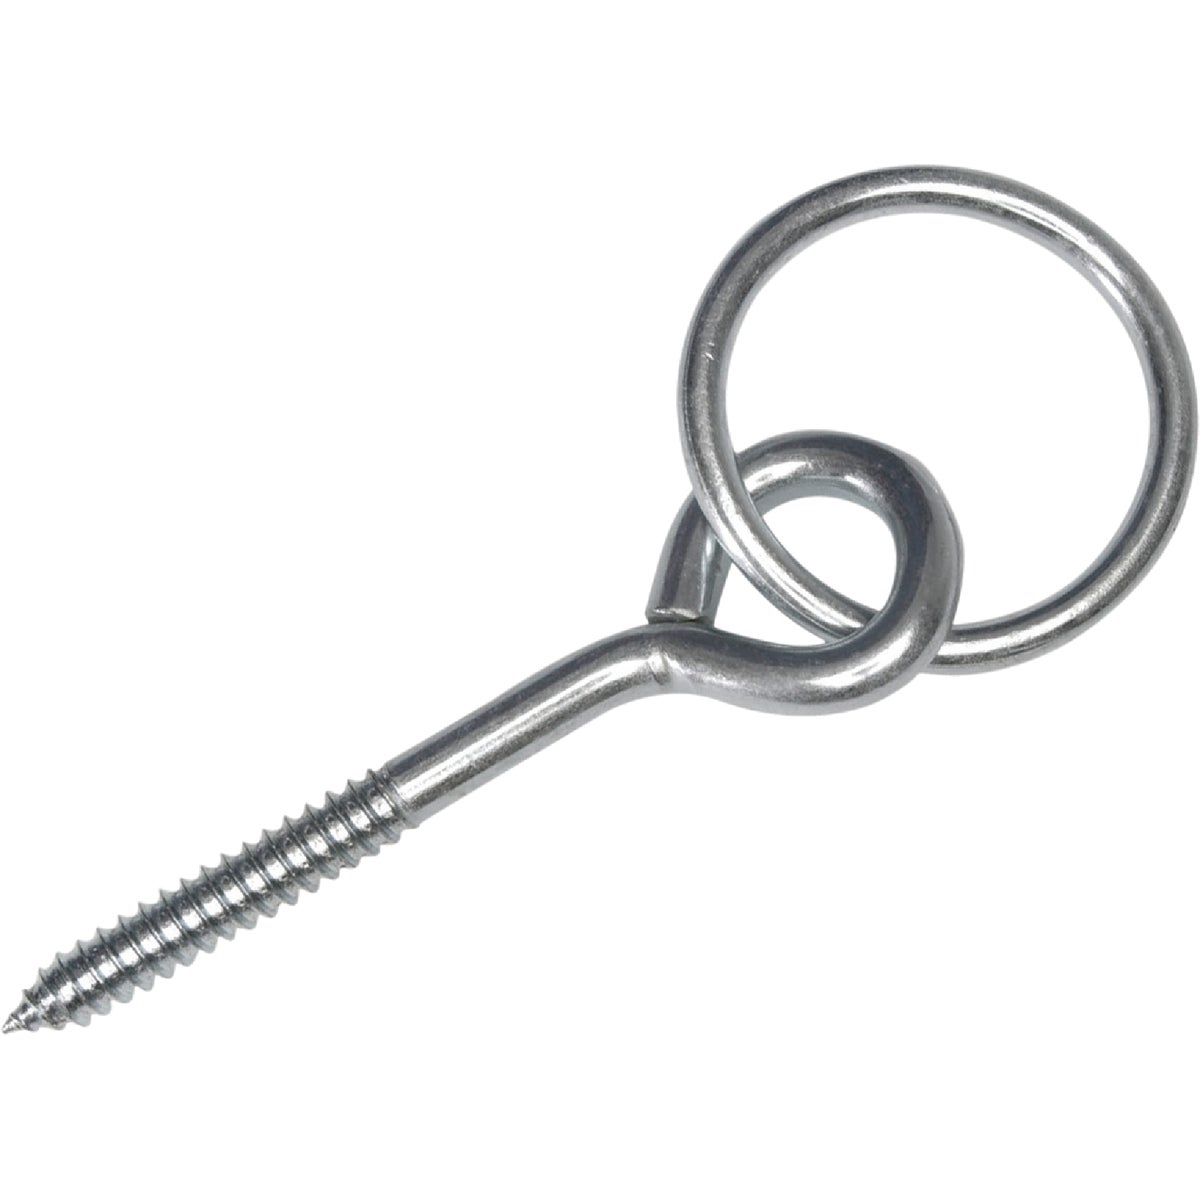 Campbell T7663550 Campbell 2 In. Zinc-Plated Steel Hitch Ring with Screw Eye T7663550